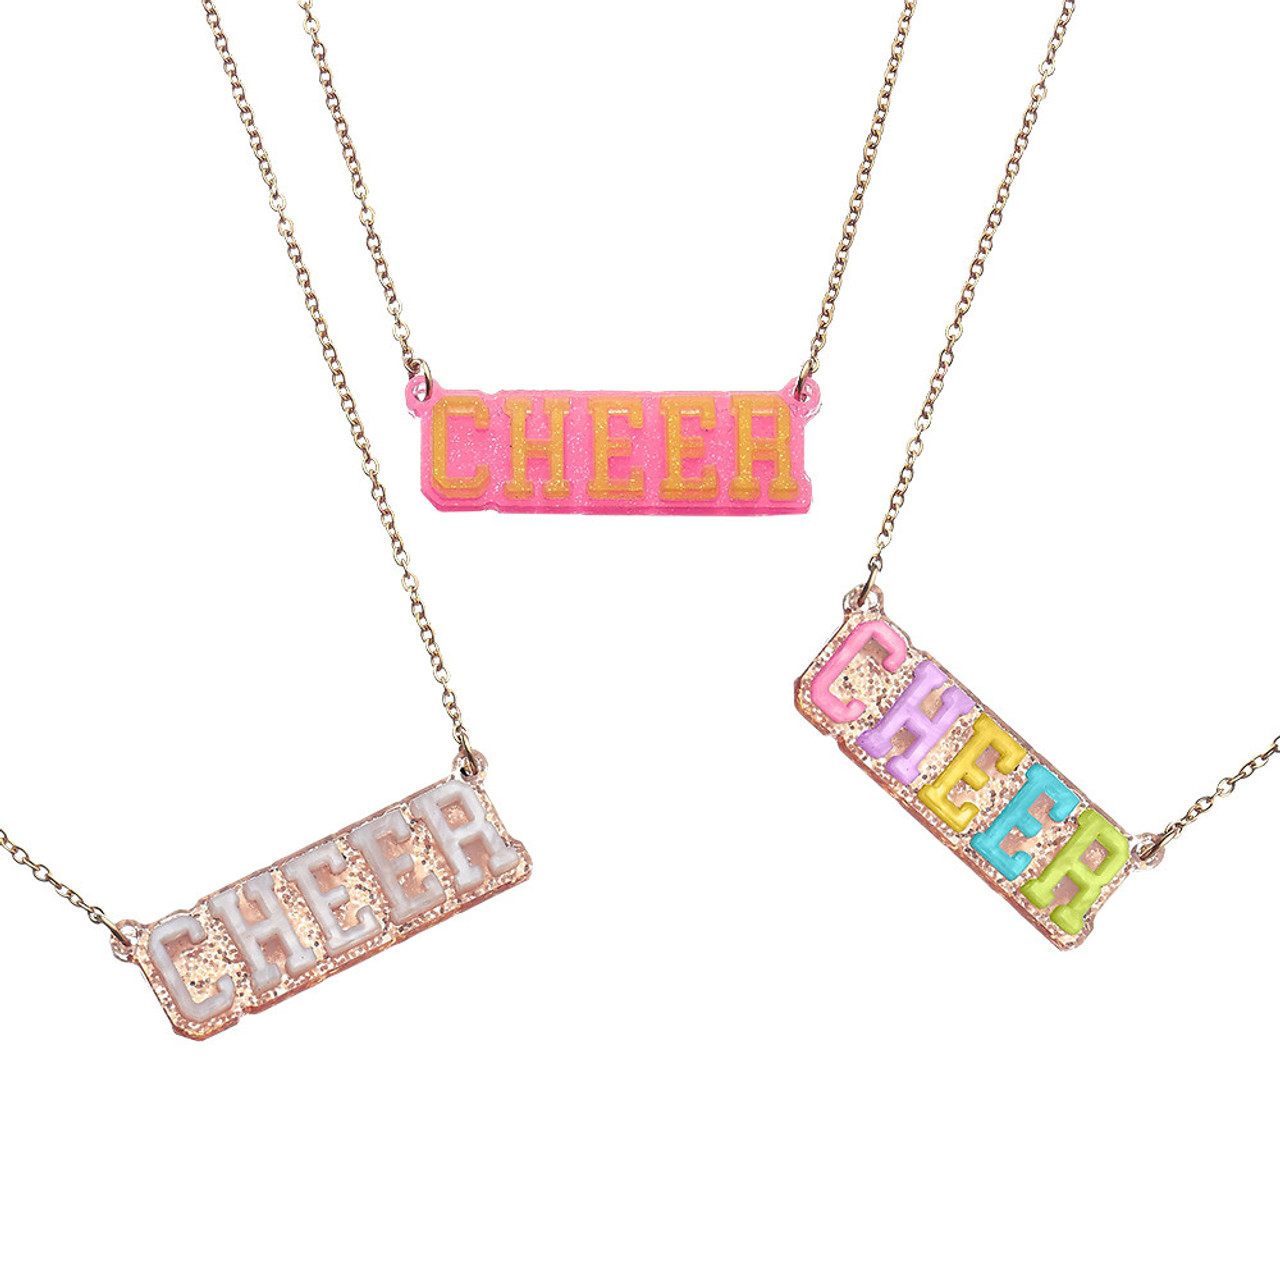 JV Charm Cheer Necklaces by Top Trenz